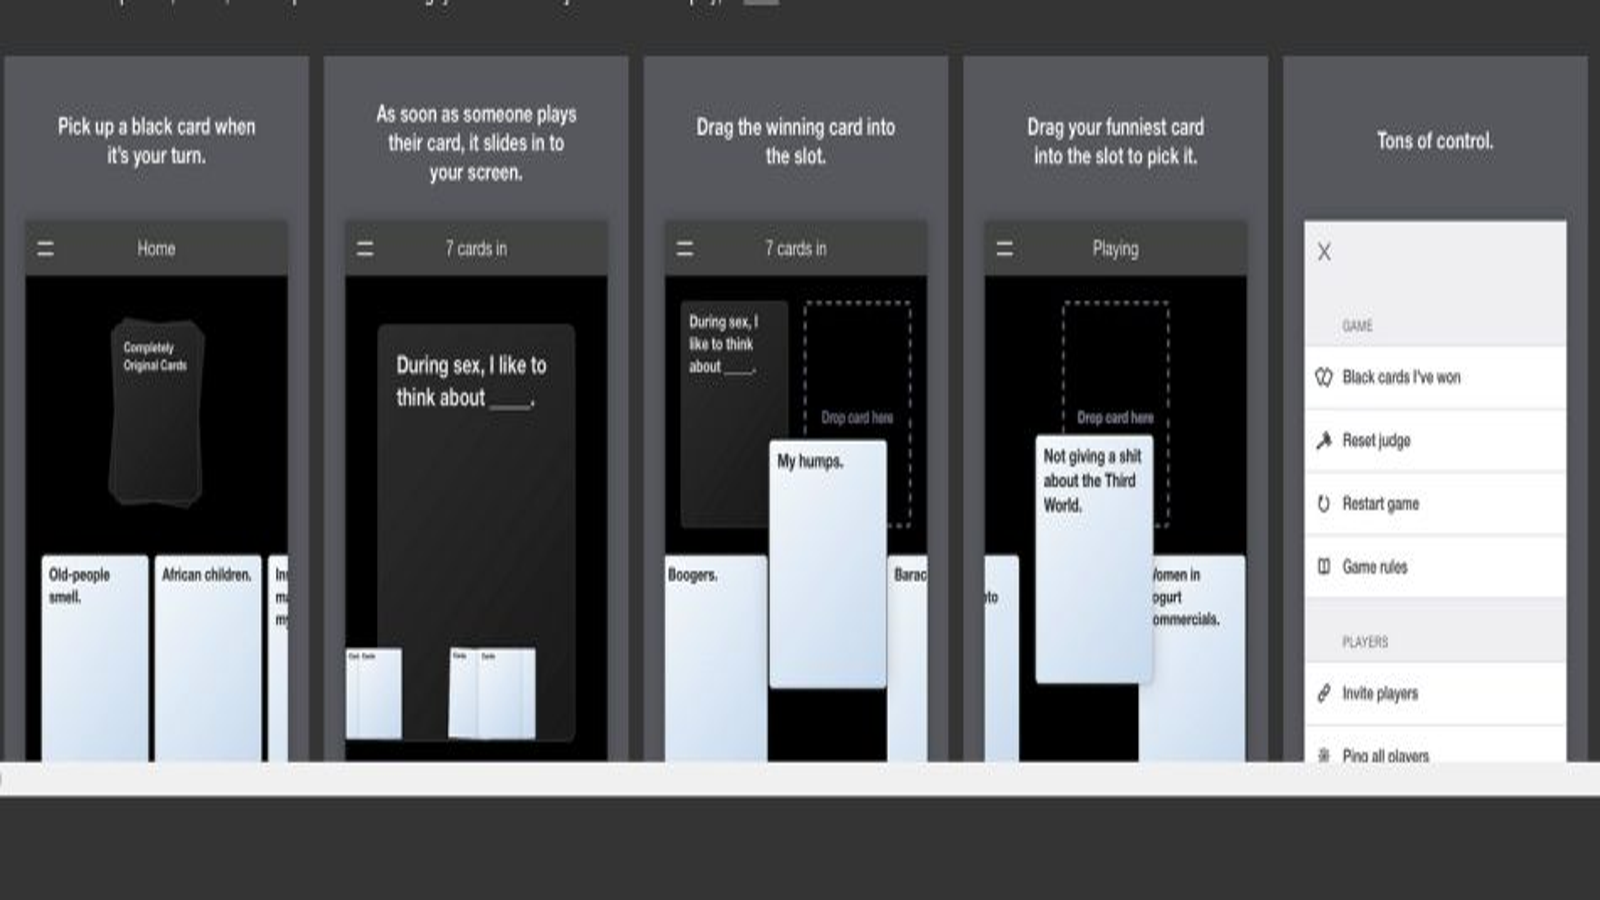 Cards Against Humanity BUT IN ROBLOX!?! 